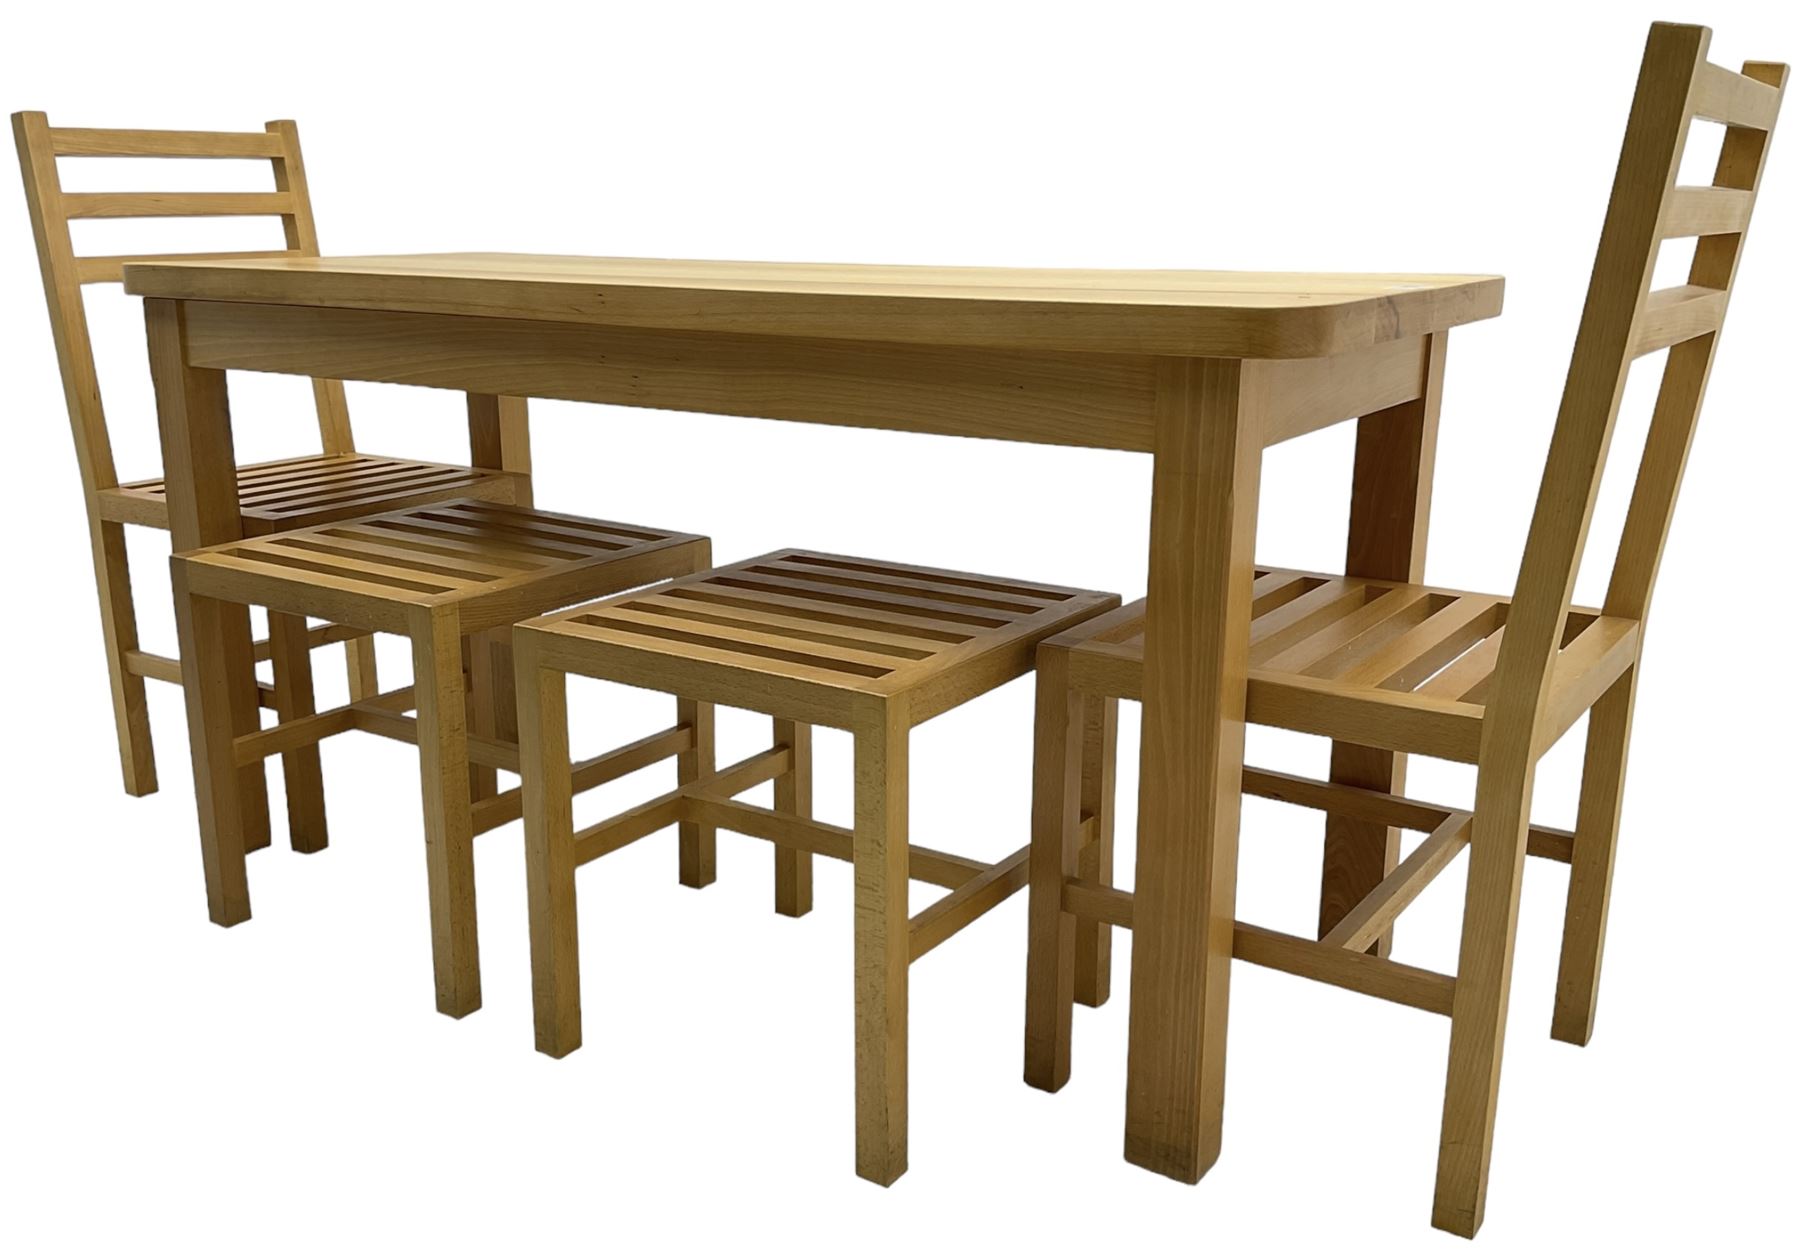 Light beech rectangular dining table; together with two chairs and two stools - Image 3 of 6